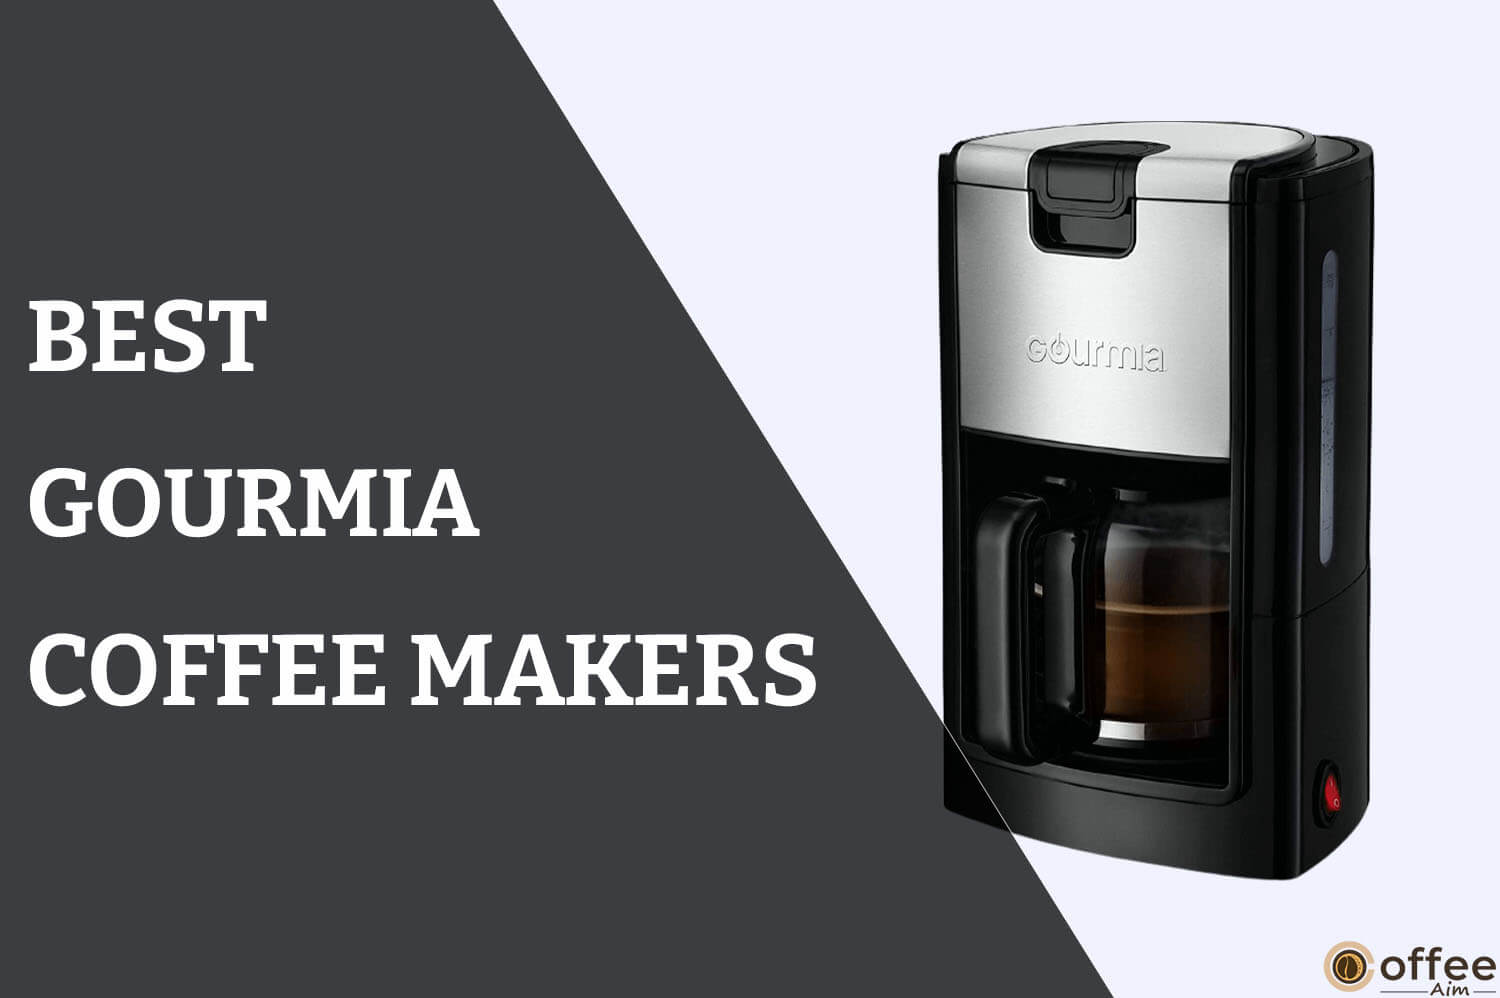 Feature image for the article "Best Gourmia Coffee Makers"